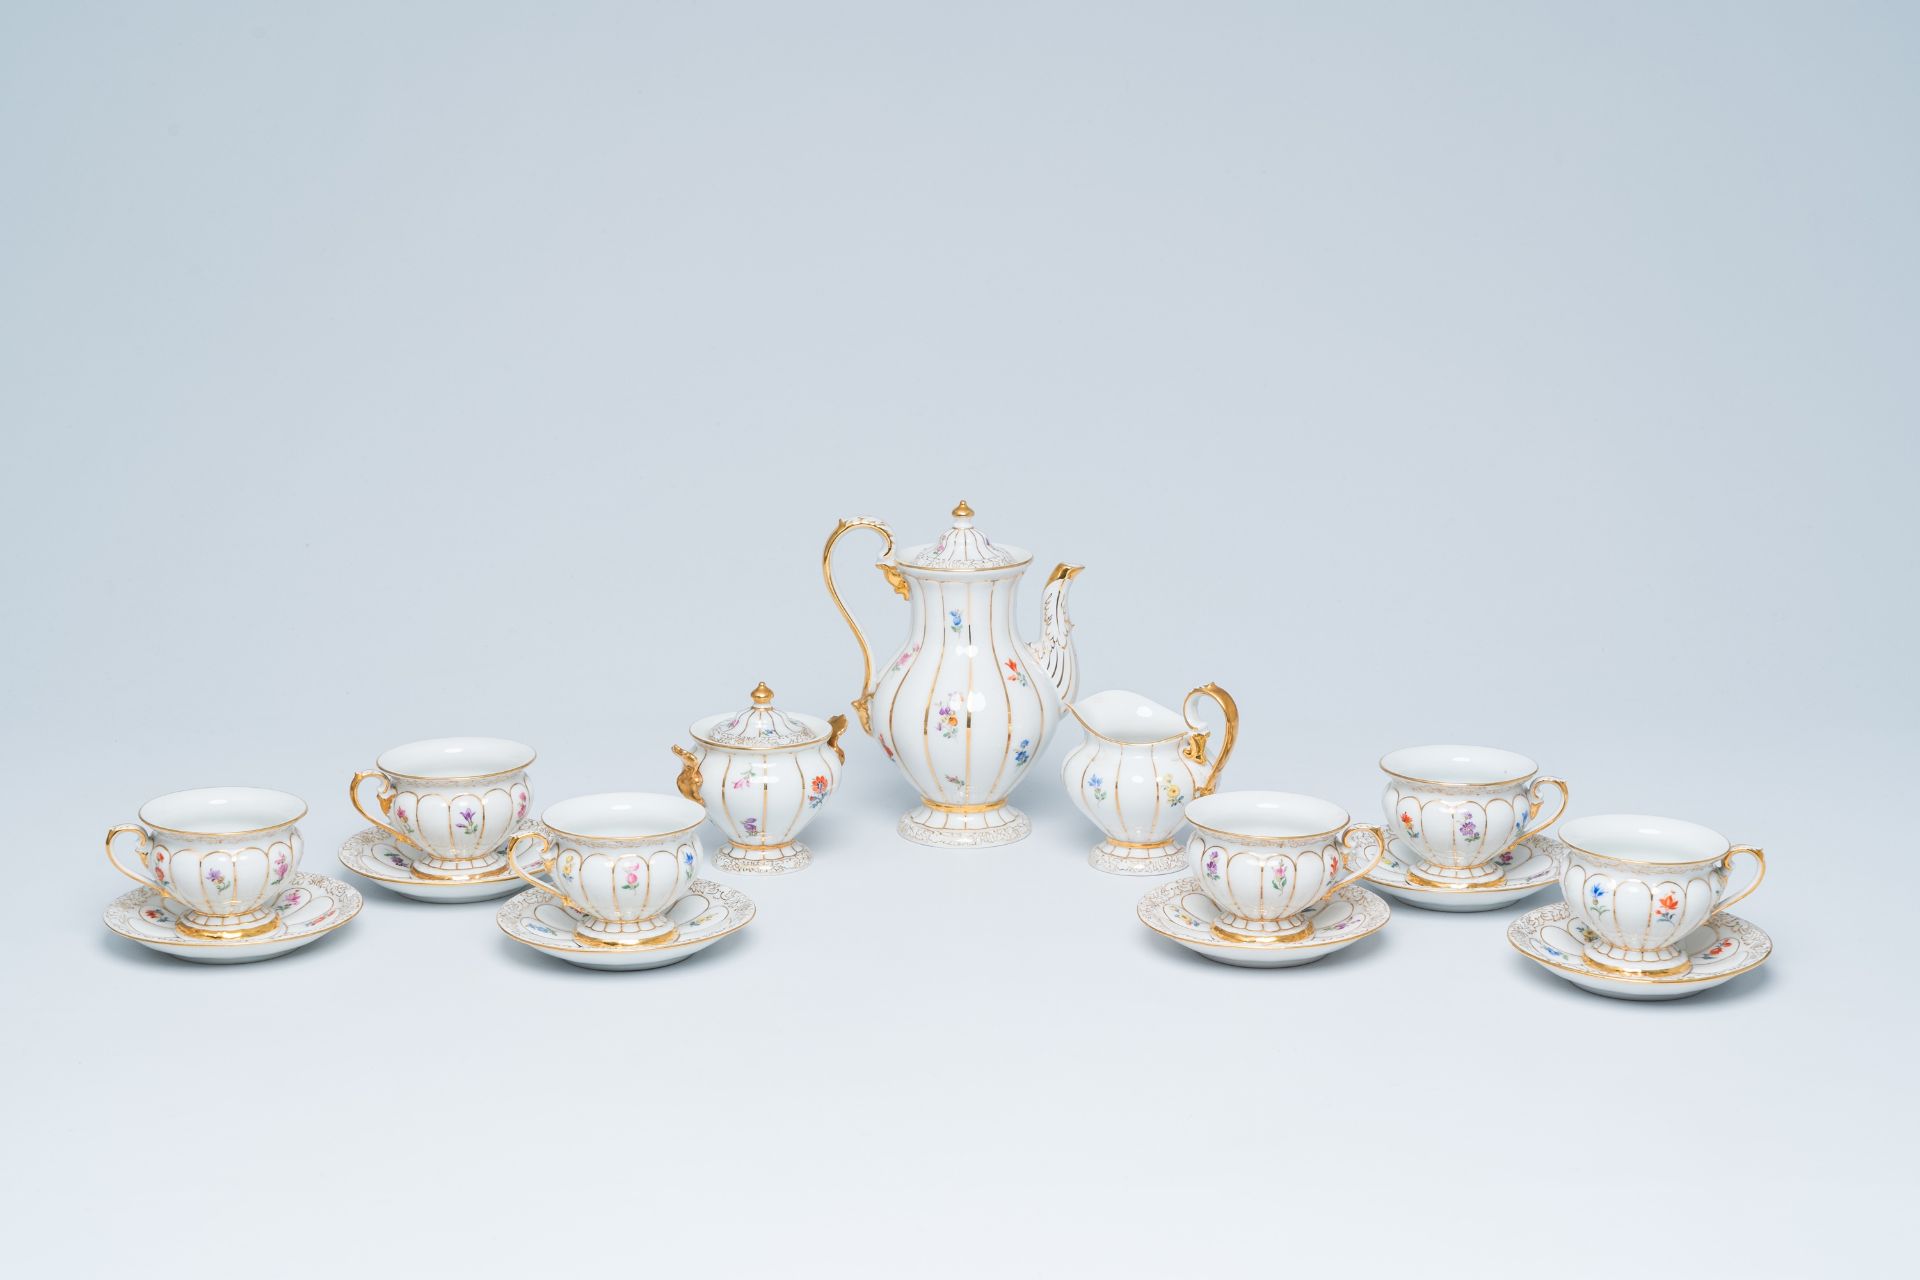 A German fifteen-piece polychrome and gilt Meissen mocha service with floral design, 20th C.